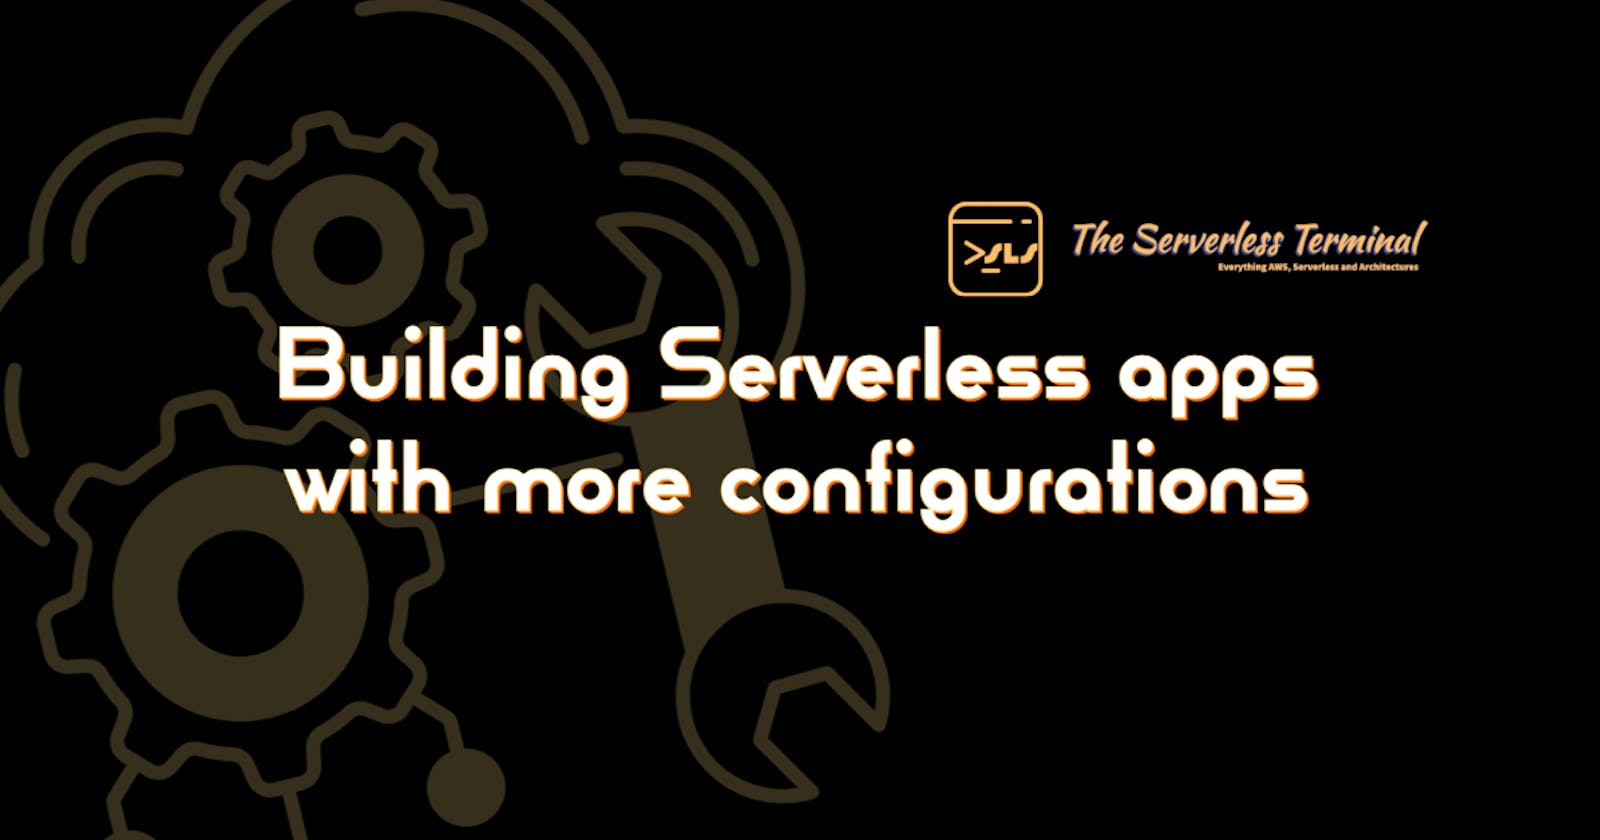 Building Serverless apps with more configurations